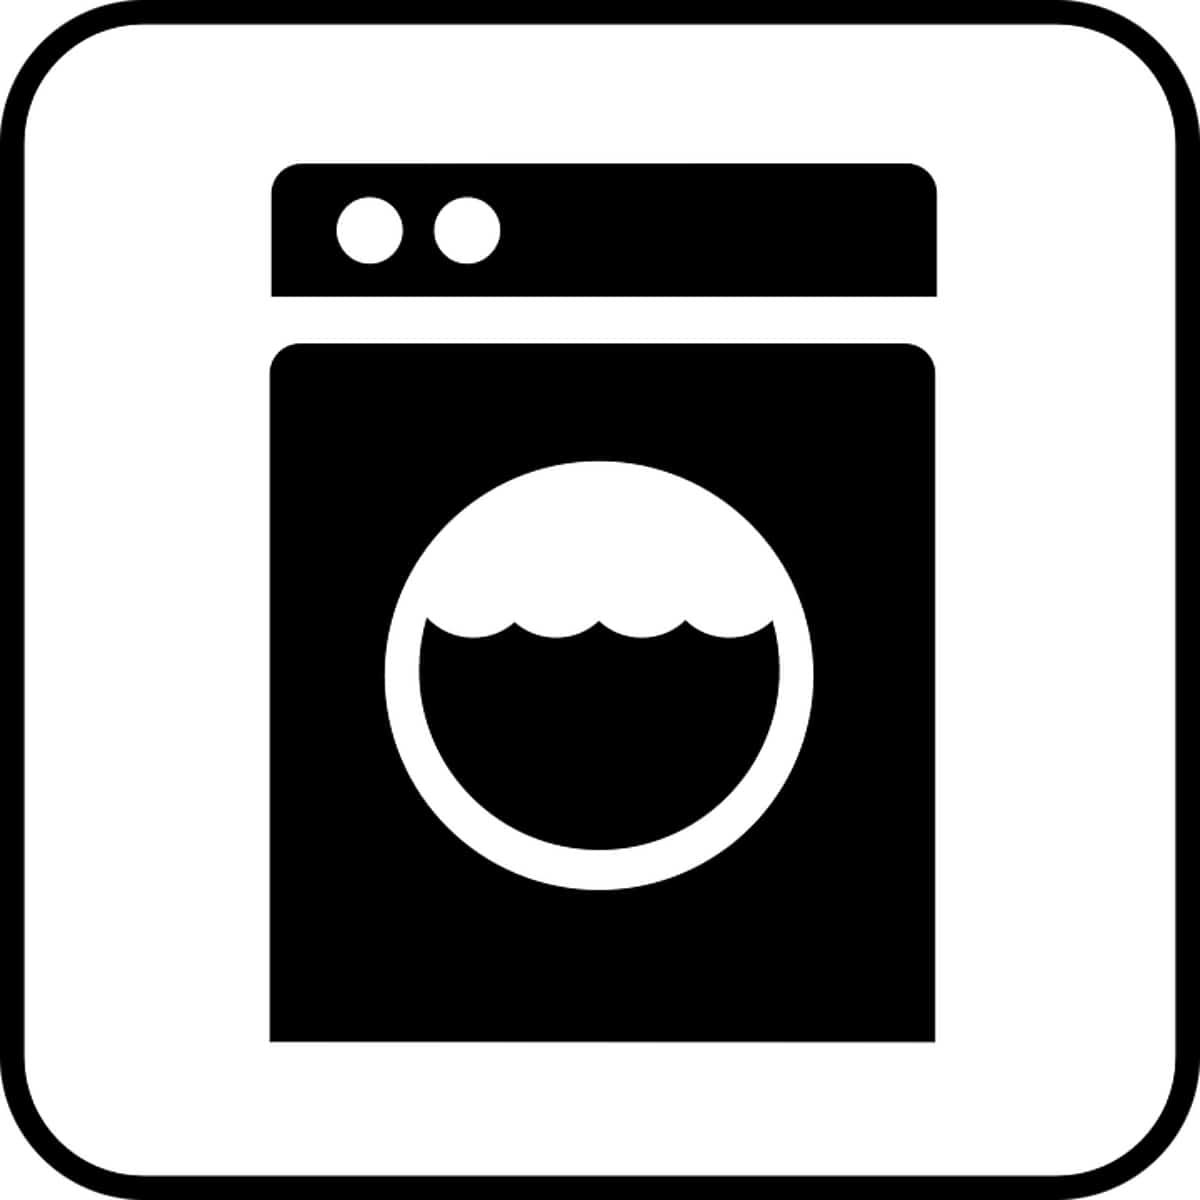 Washing machine stopped working mid cycle